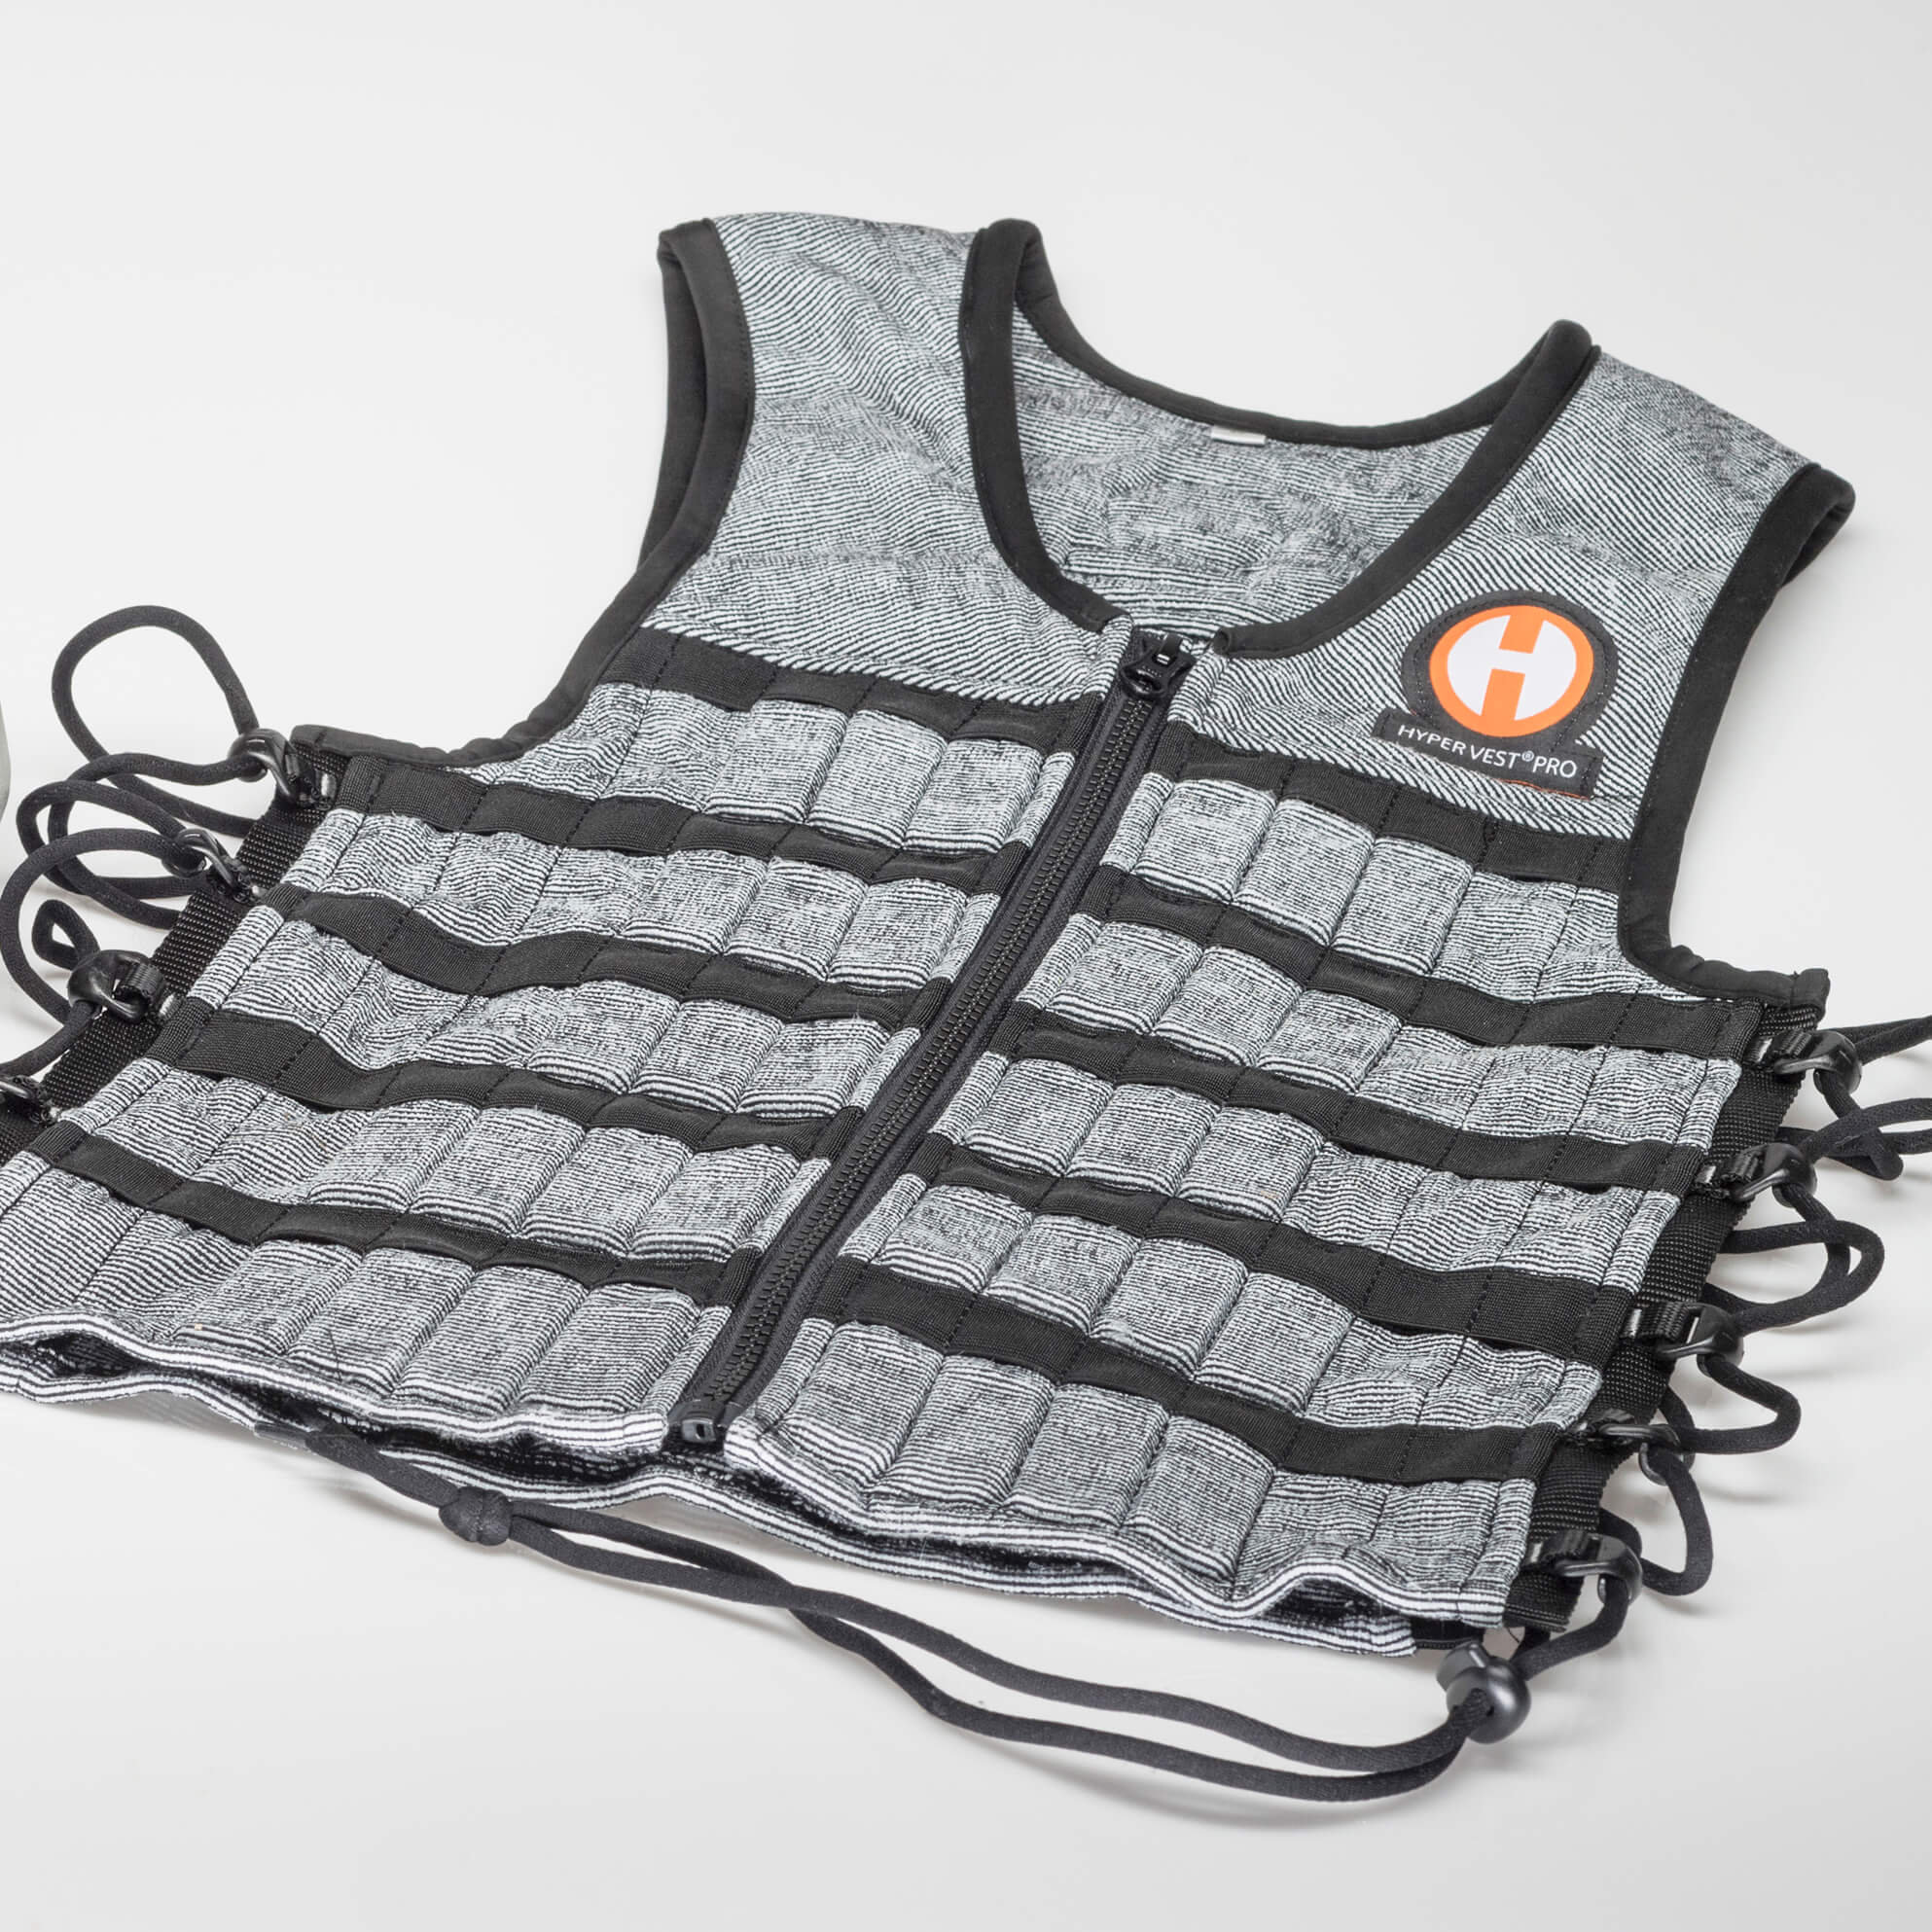 product photo of hyper vest pro lying flat zipped up and showing the side cords open